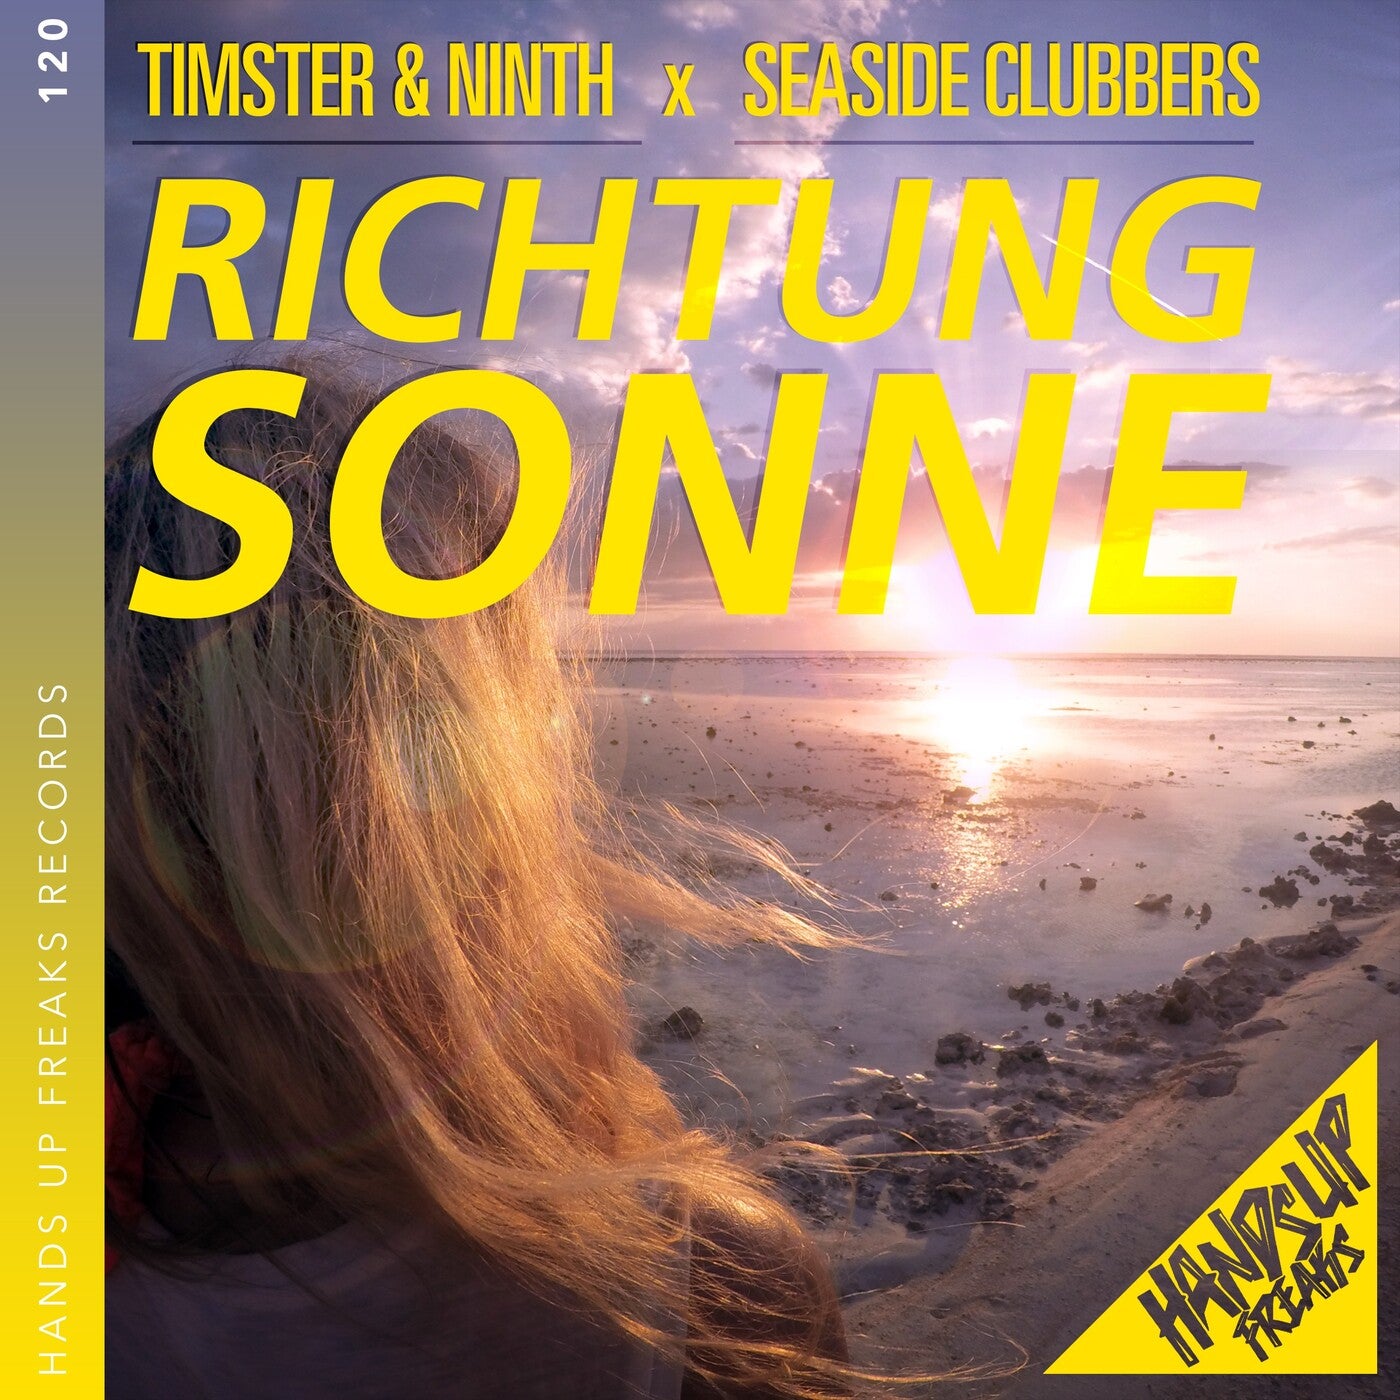 Timster, Ninth & Seaside Clubbers - Richtung Sonne (The Remixes #2) [Hands Up Freaks]